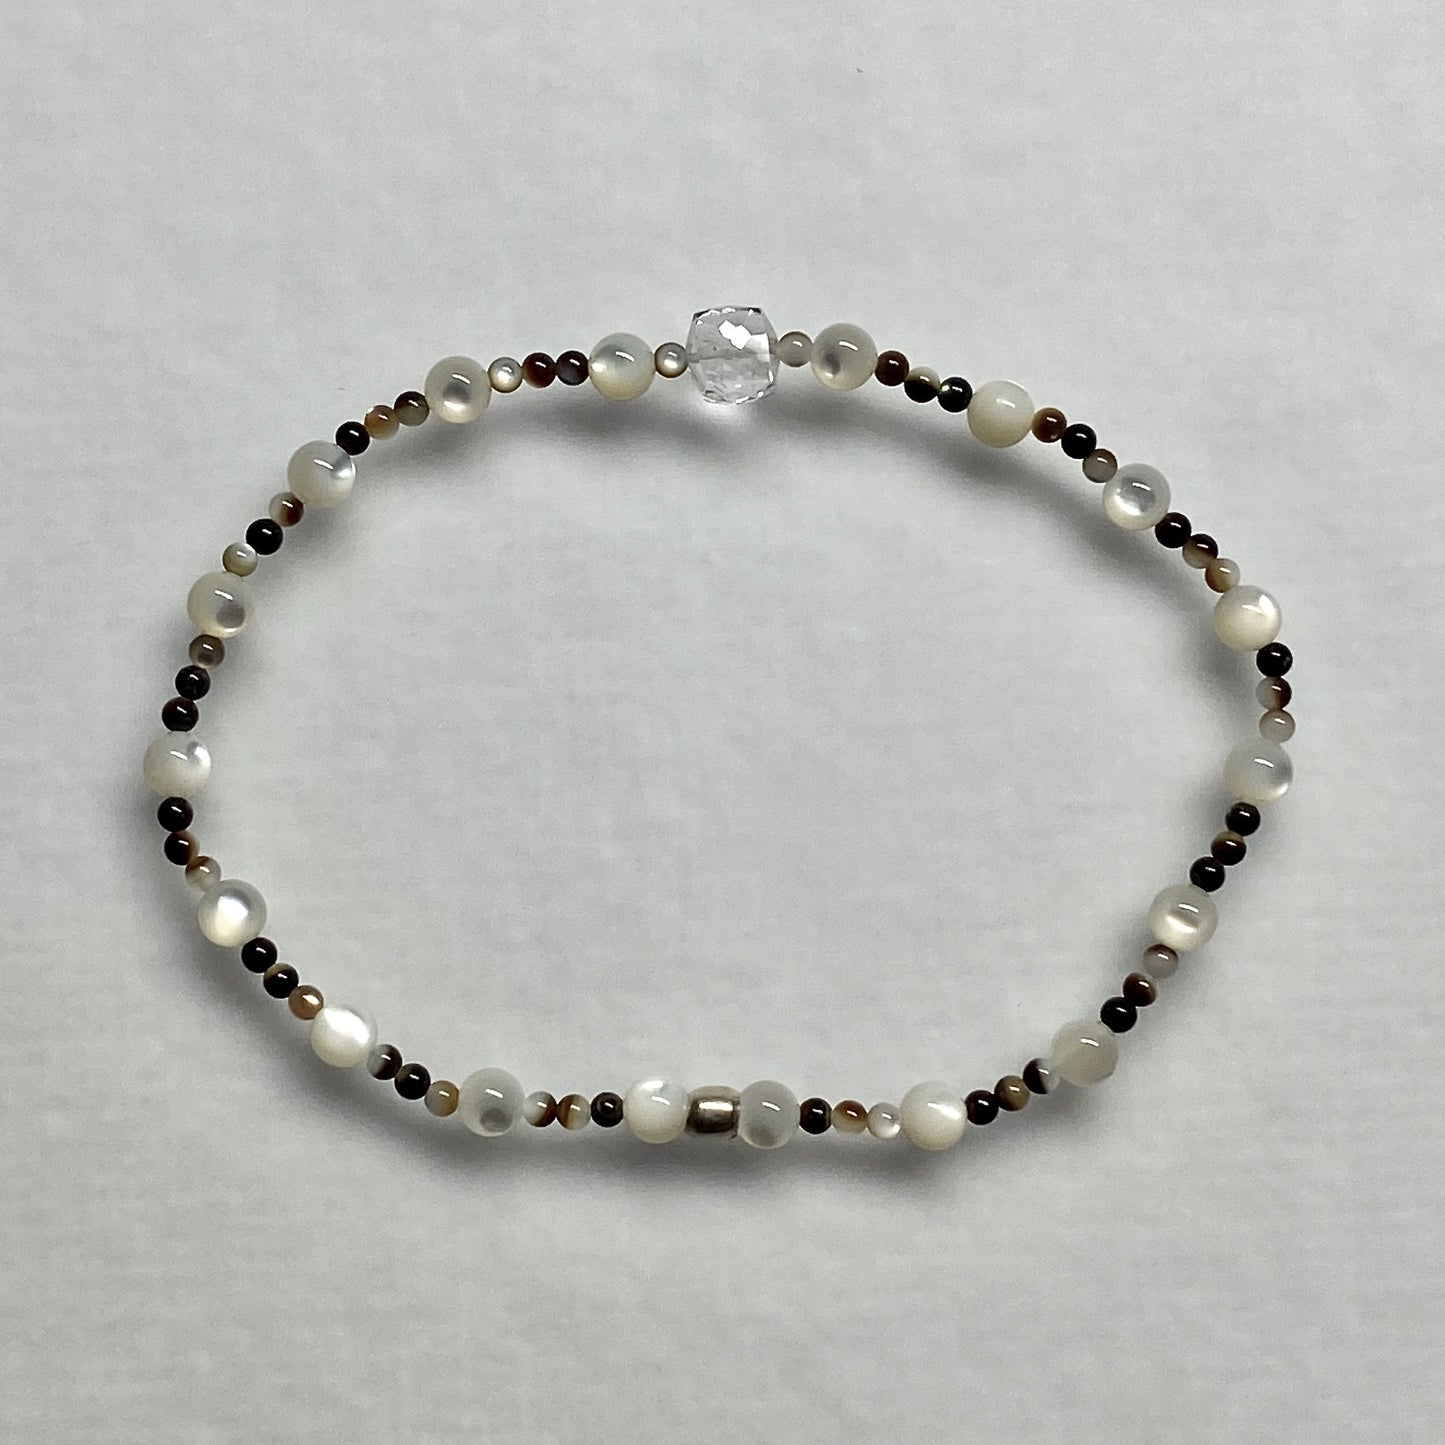 "Moon Water" beachlove stretch bracelet with white topaz & multi-color mother of pearl gemstone beads